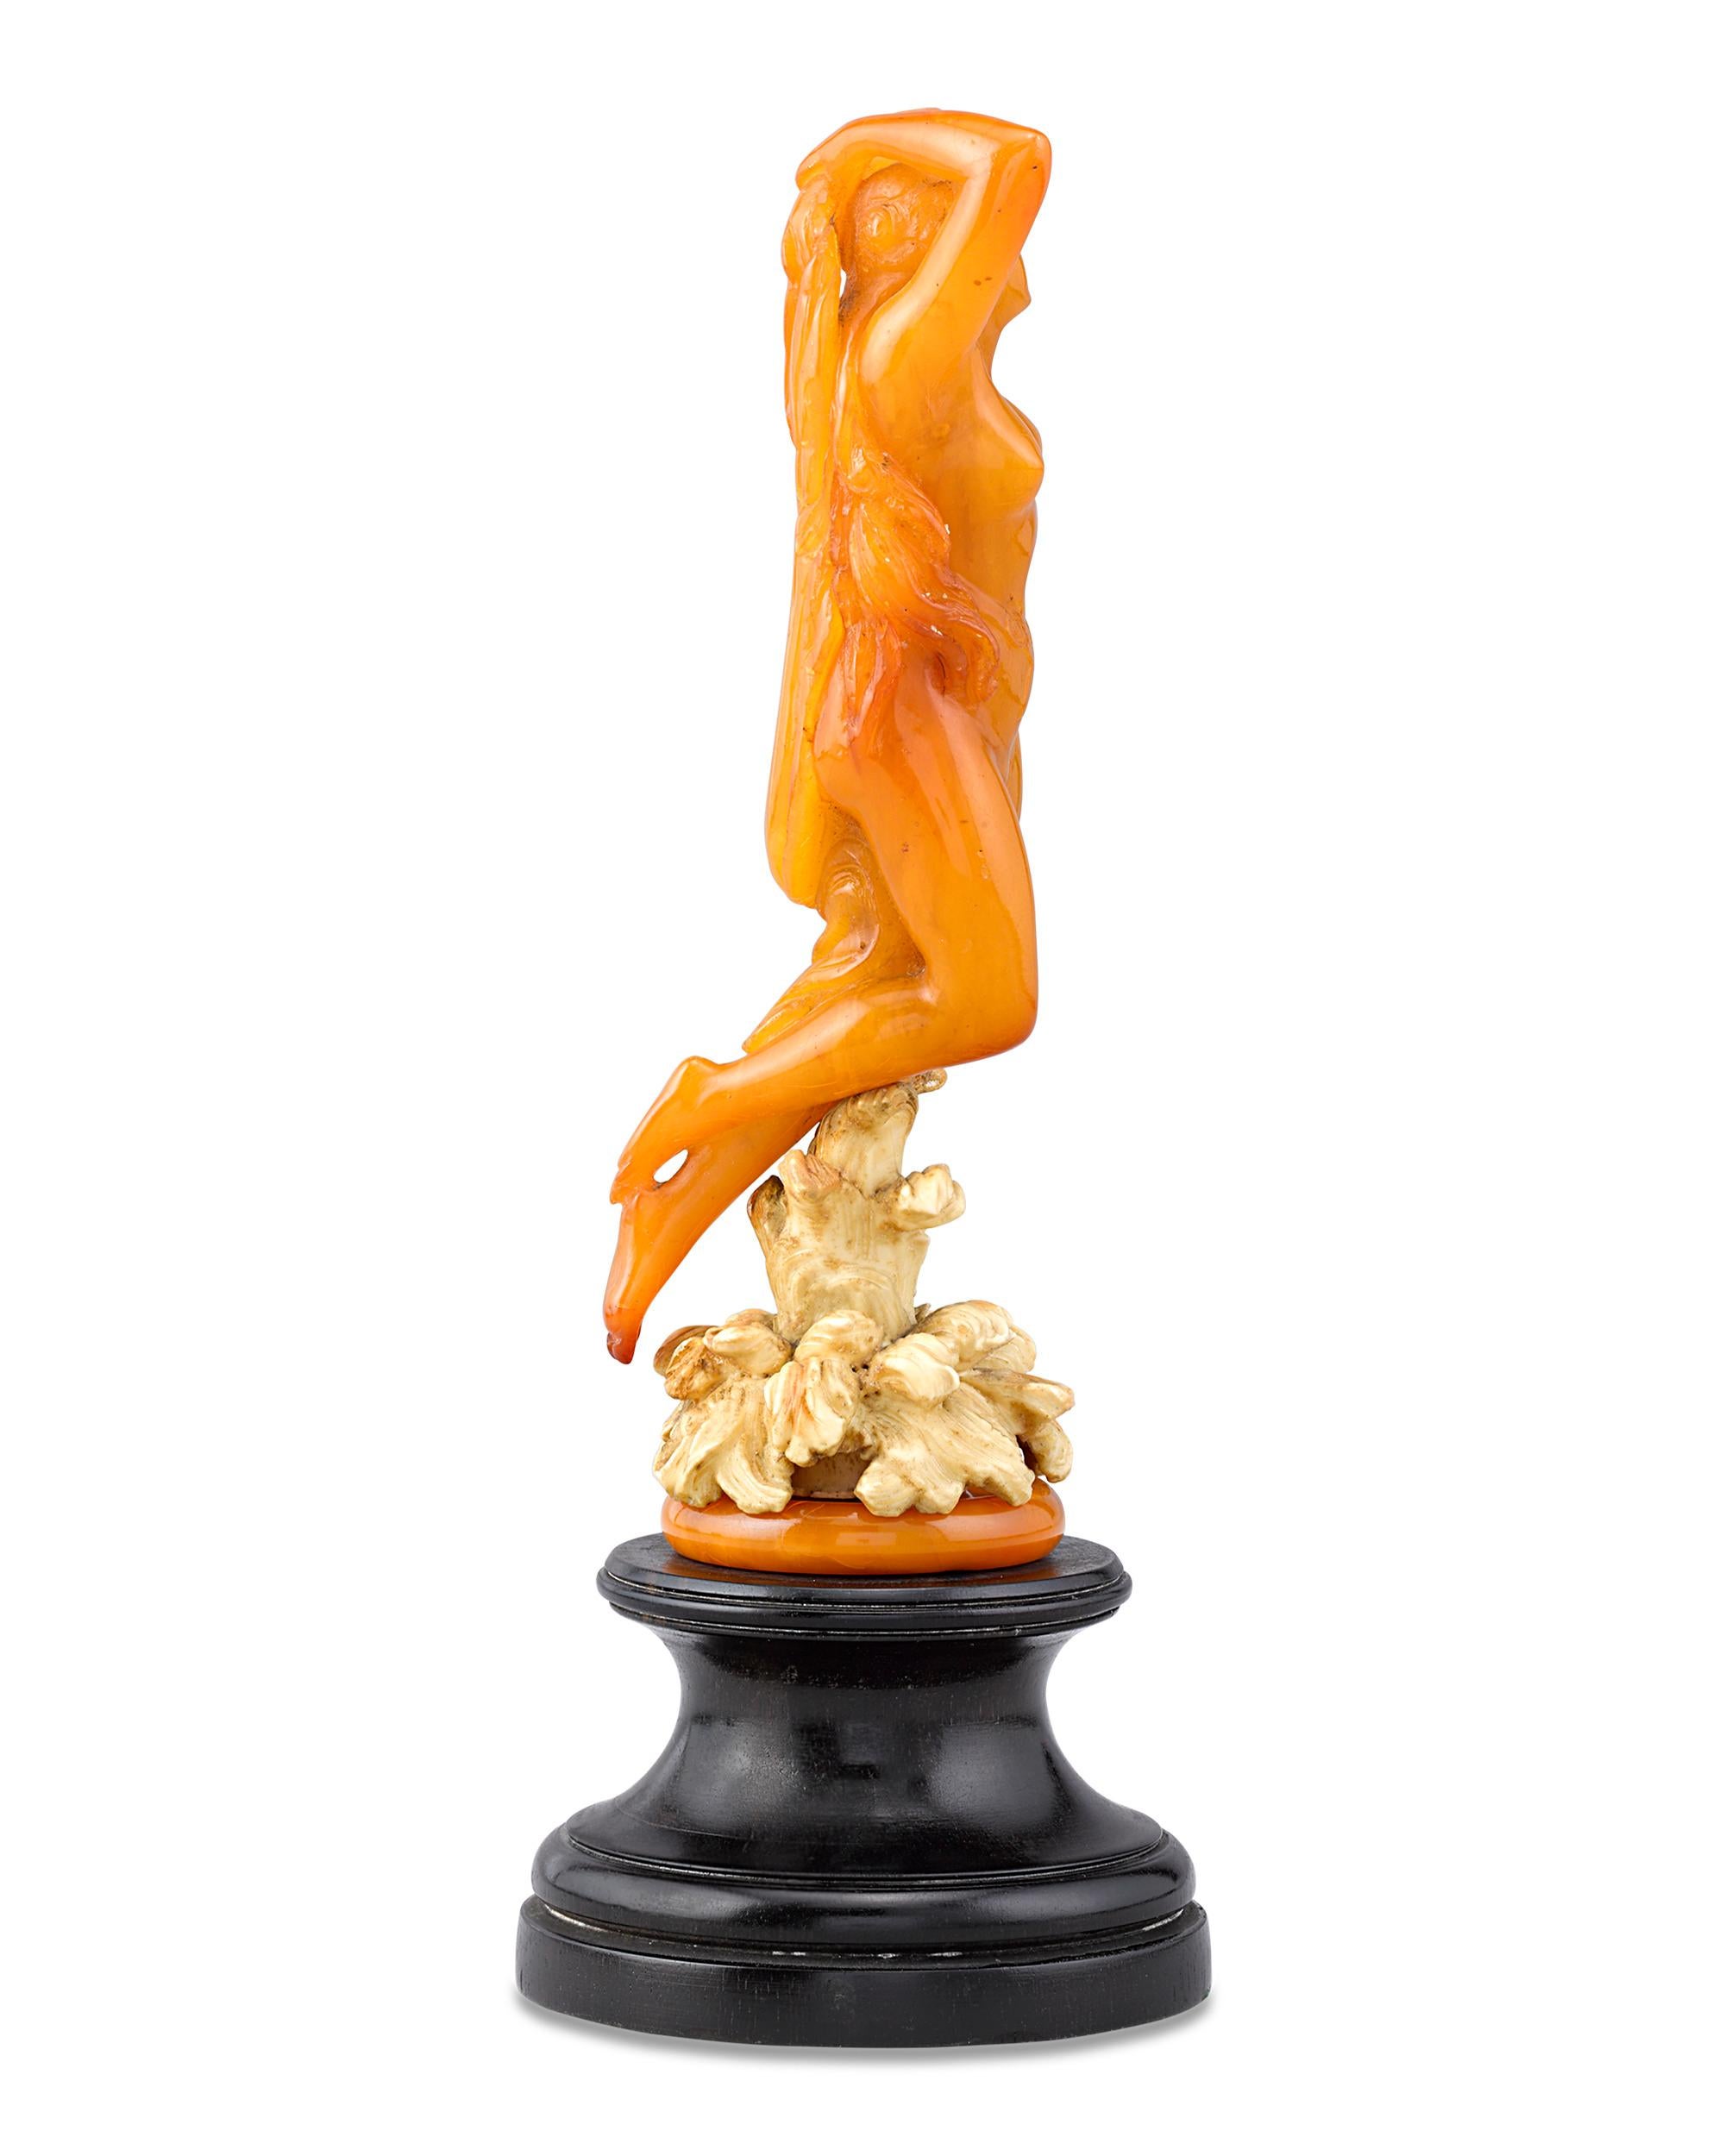 The enchanting water nymph in this exquisite Art Nouveau-era statuette is carved of solid amber. Art Nouveau, an avant-garde style that emerged in the early 1890s, received widespread popularity almost simultaneously throughout Europe and the United